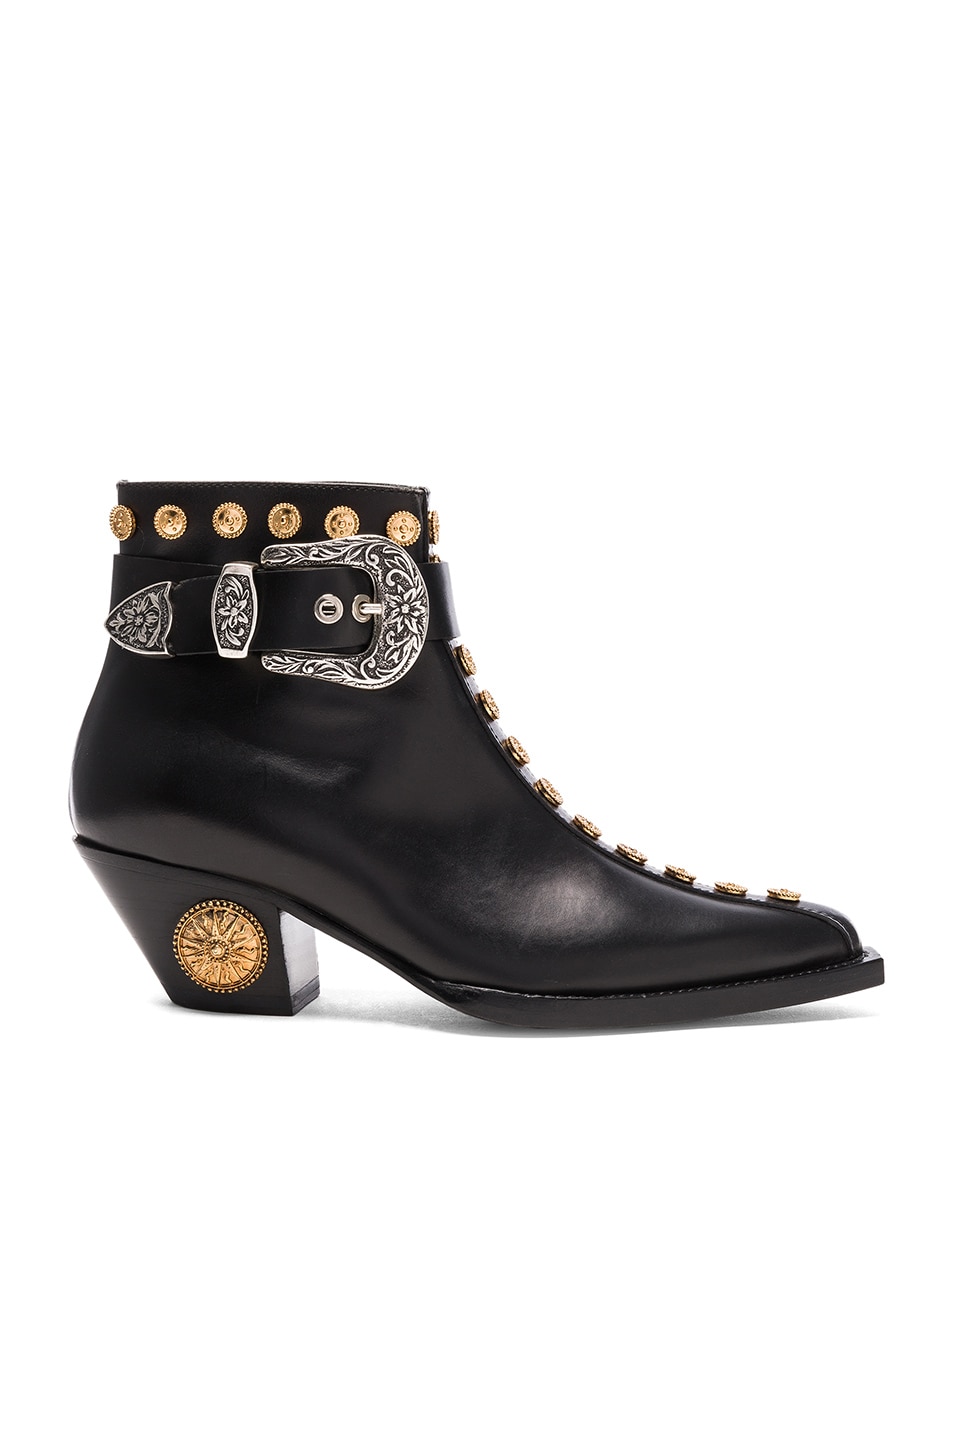 Image 1 of Fausto Puglisi Studded Leather Booties in Black